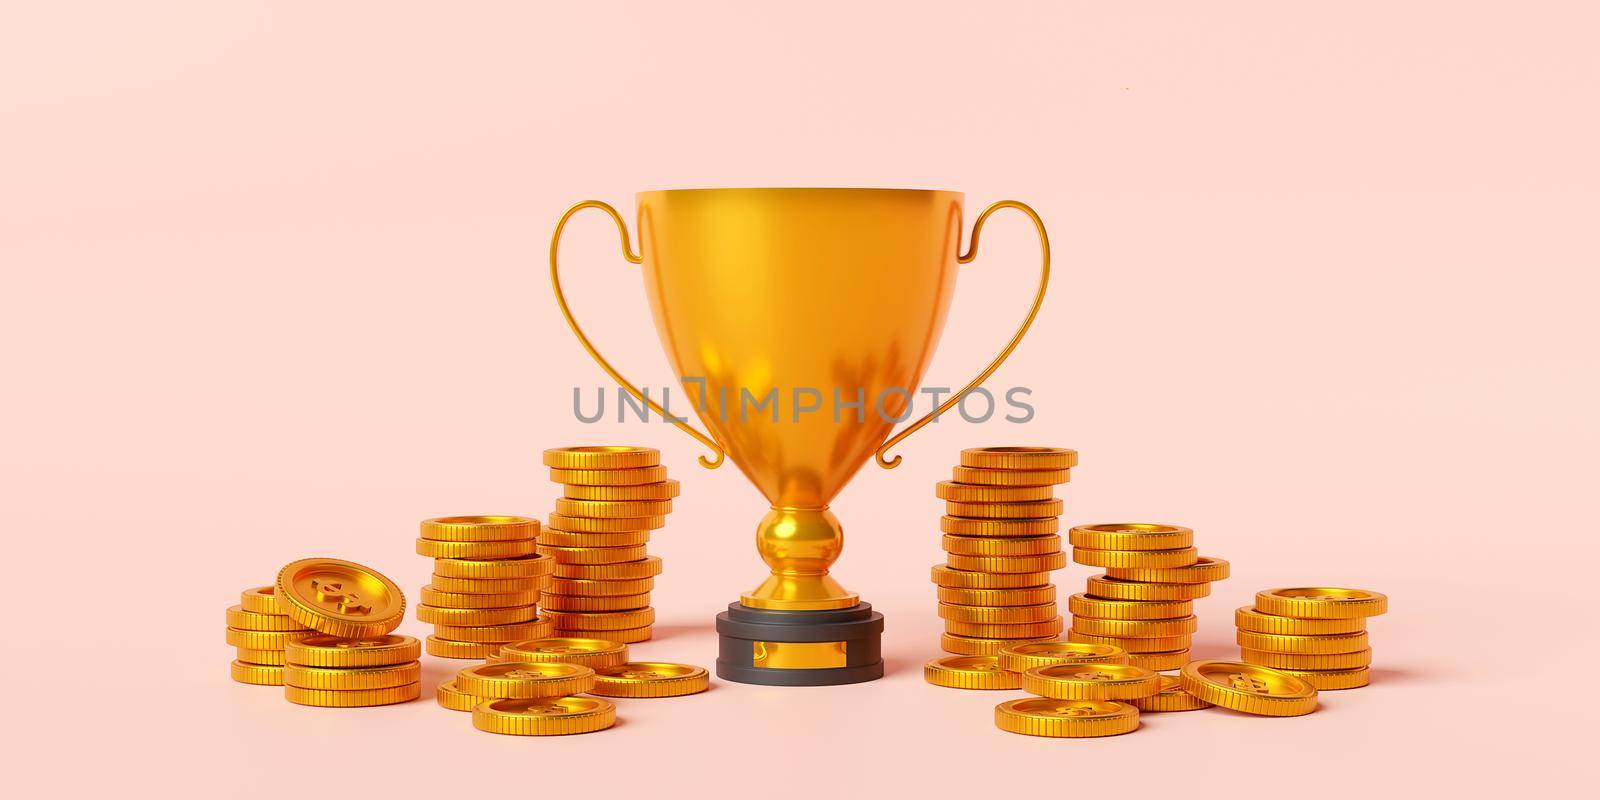 Golden trophy with dollar coin prize for the winner, 3d illustration